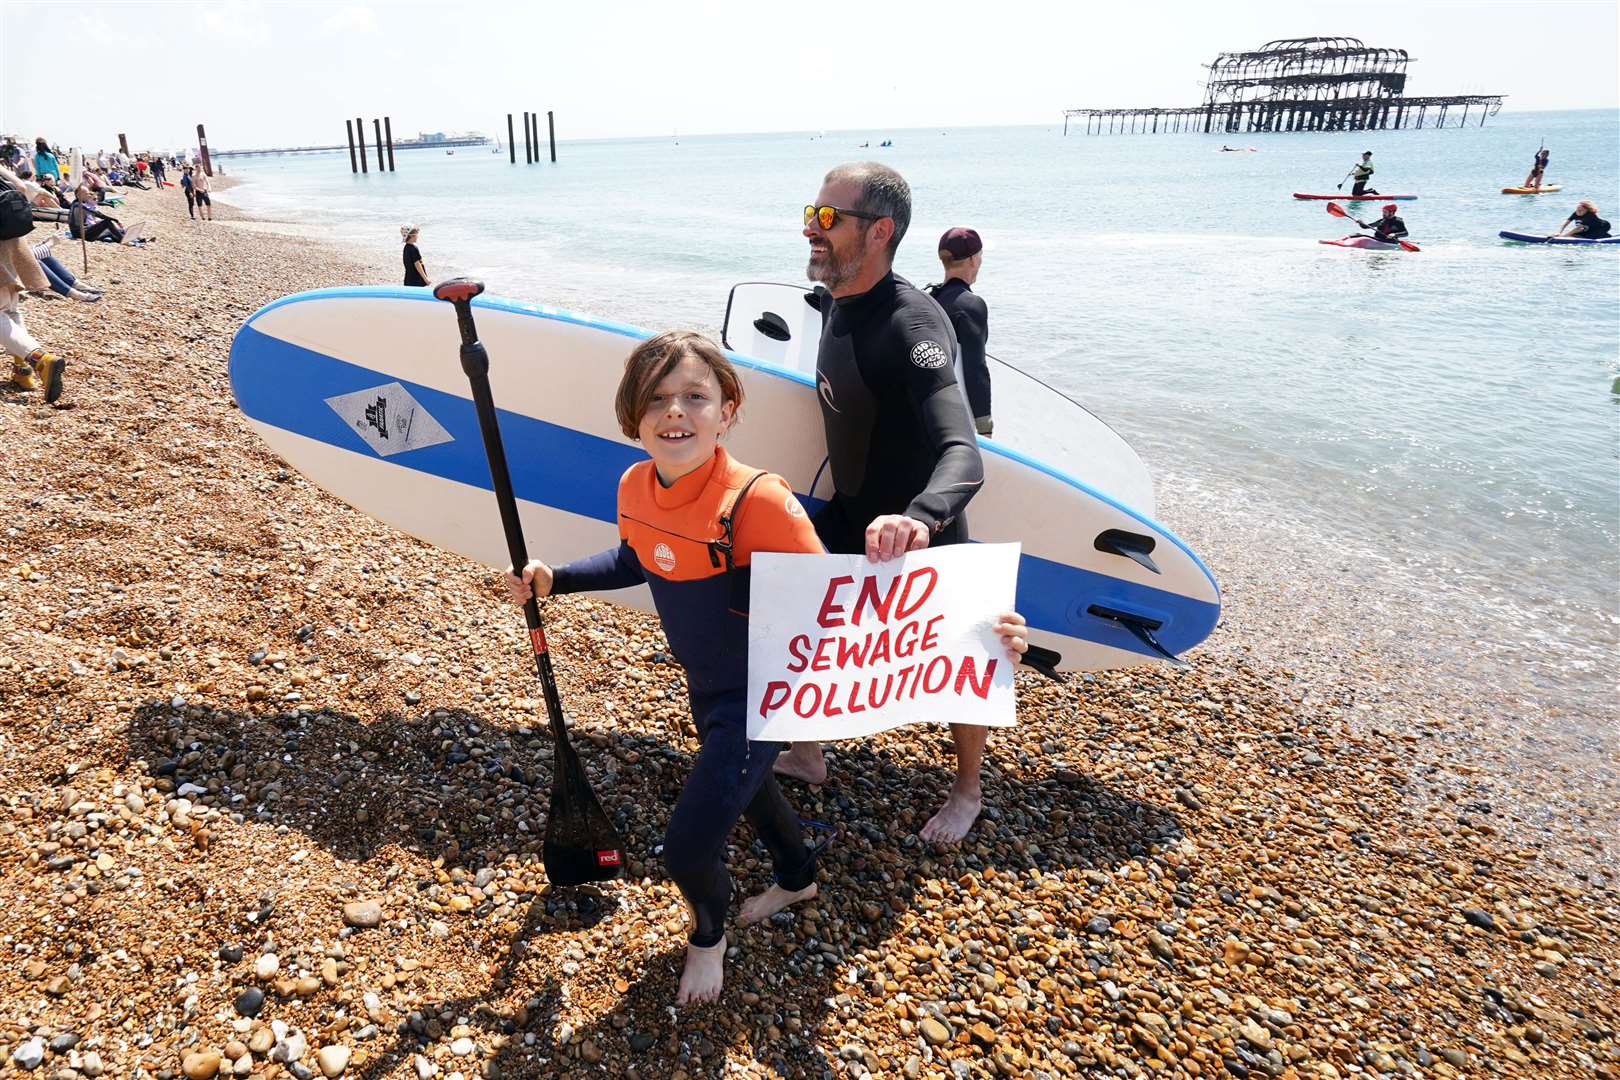 A young person holds up a placard as Surfers Against Sewage hold a protest in Brighton (Gareth Fuller/PA)